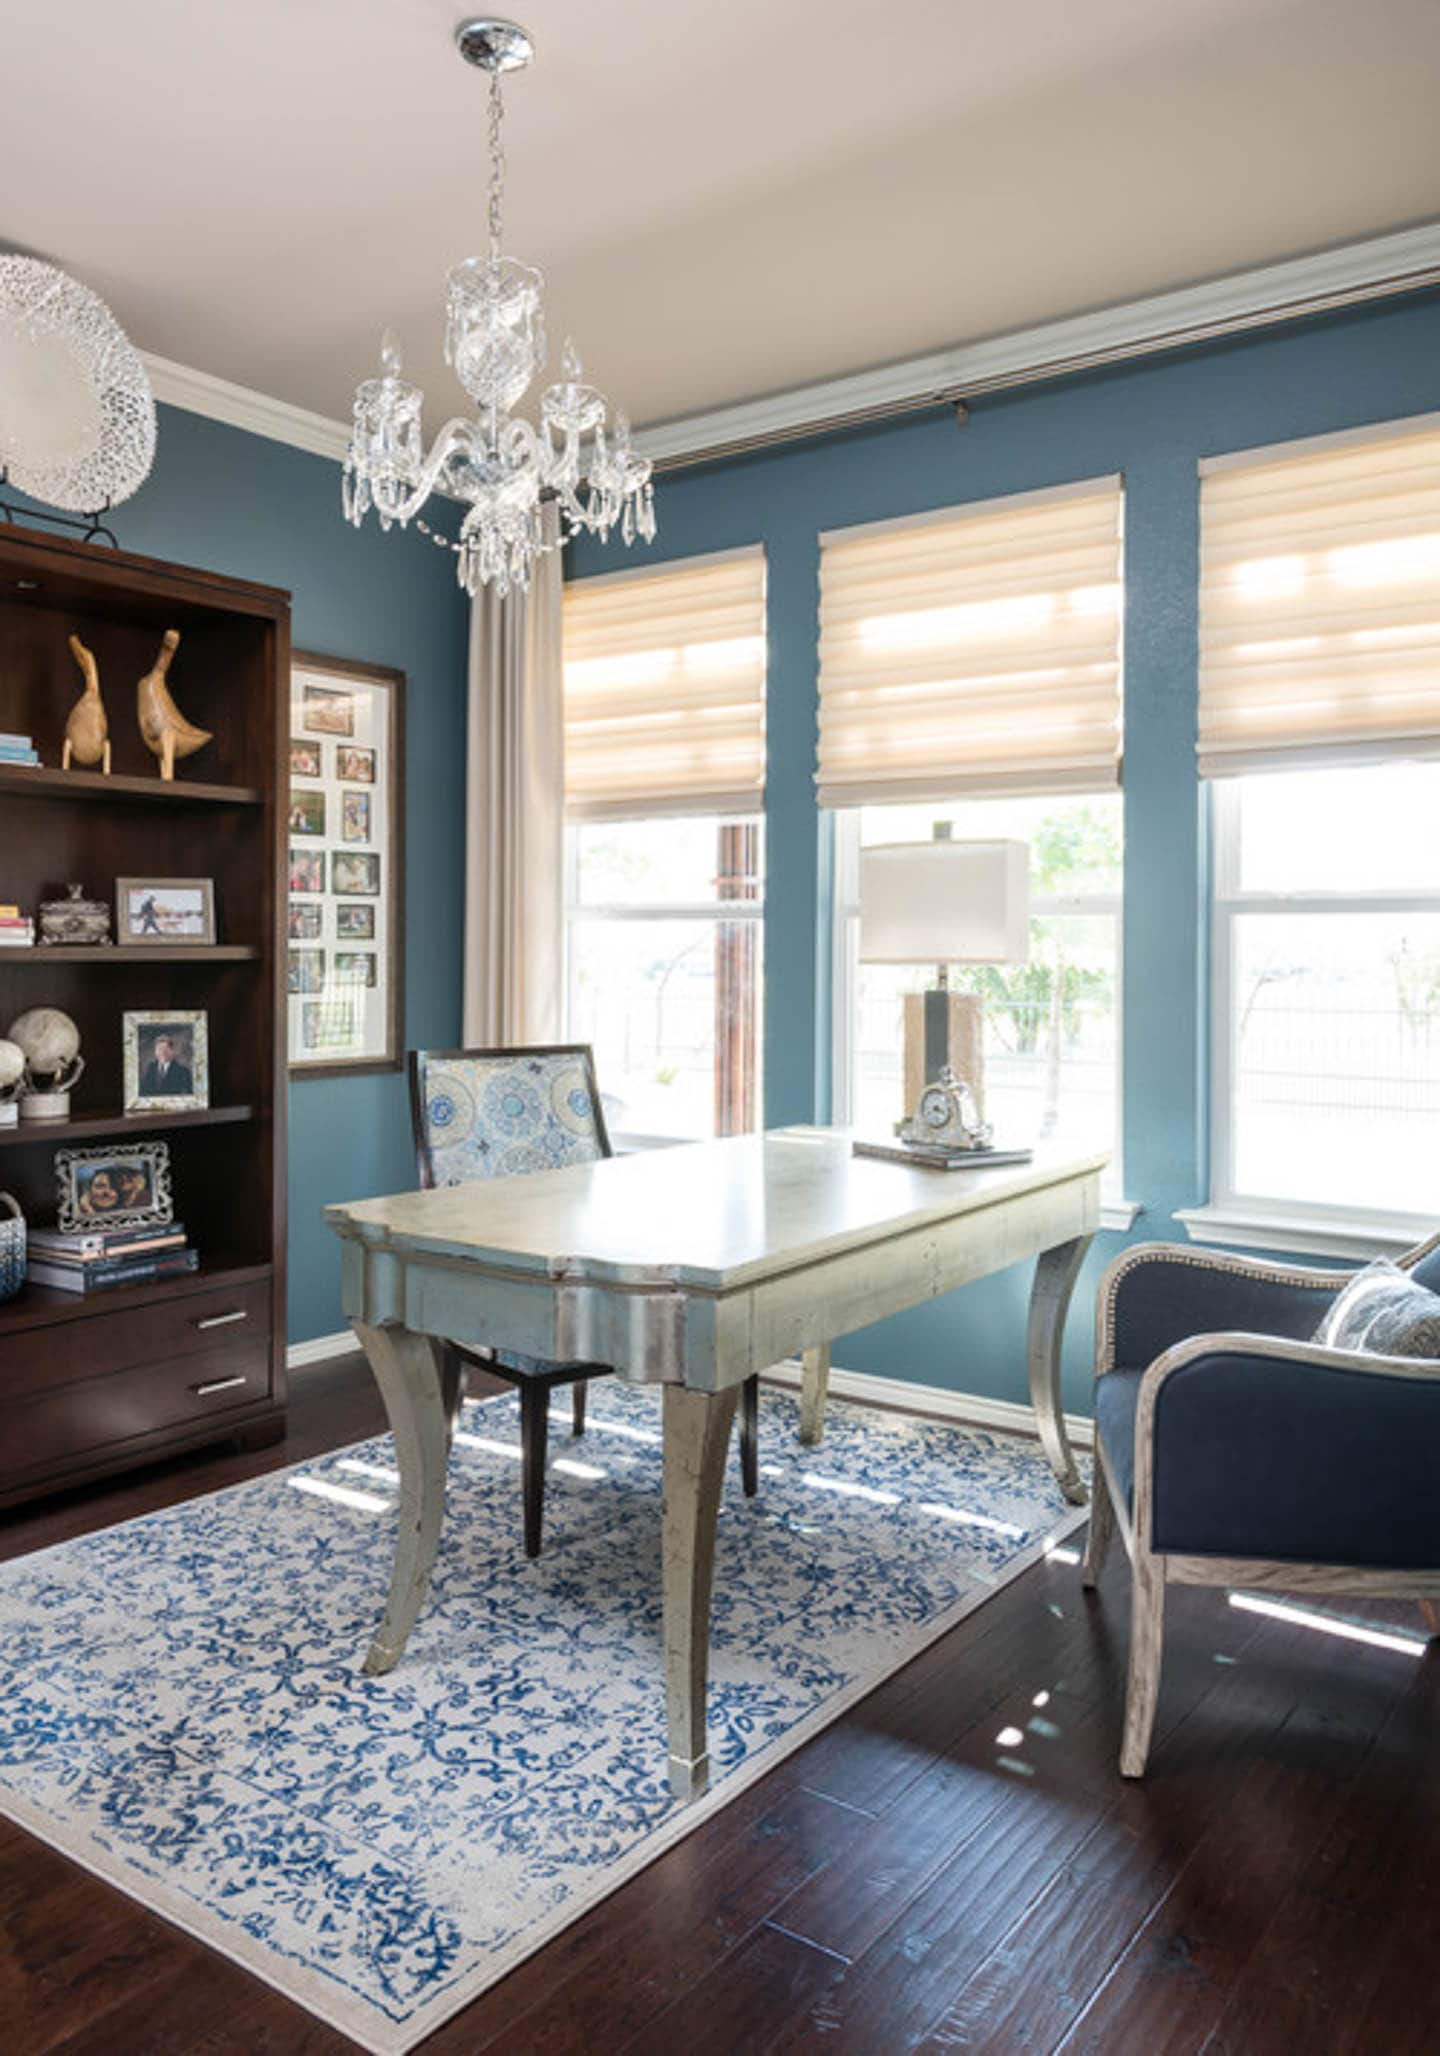 Small home office with teal walls, a silver desk, and a blue and white patterned chair and area rug